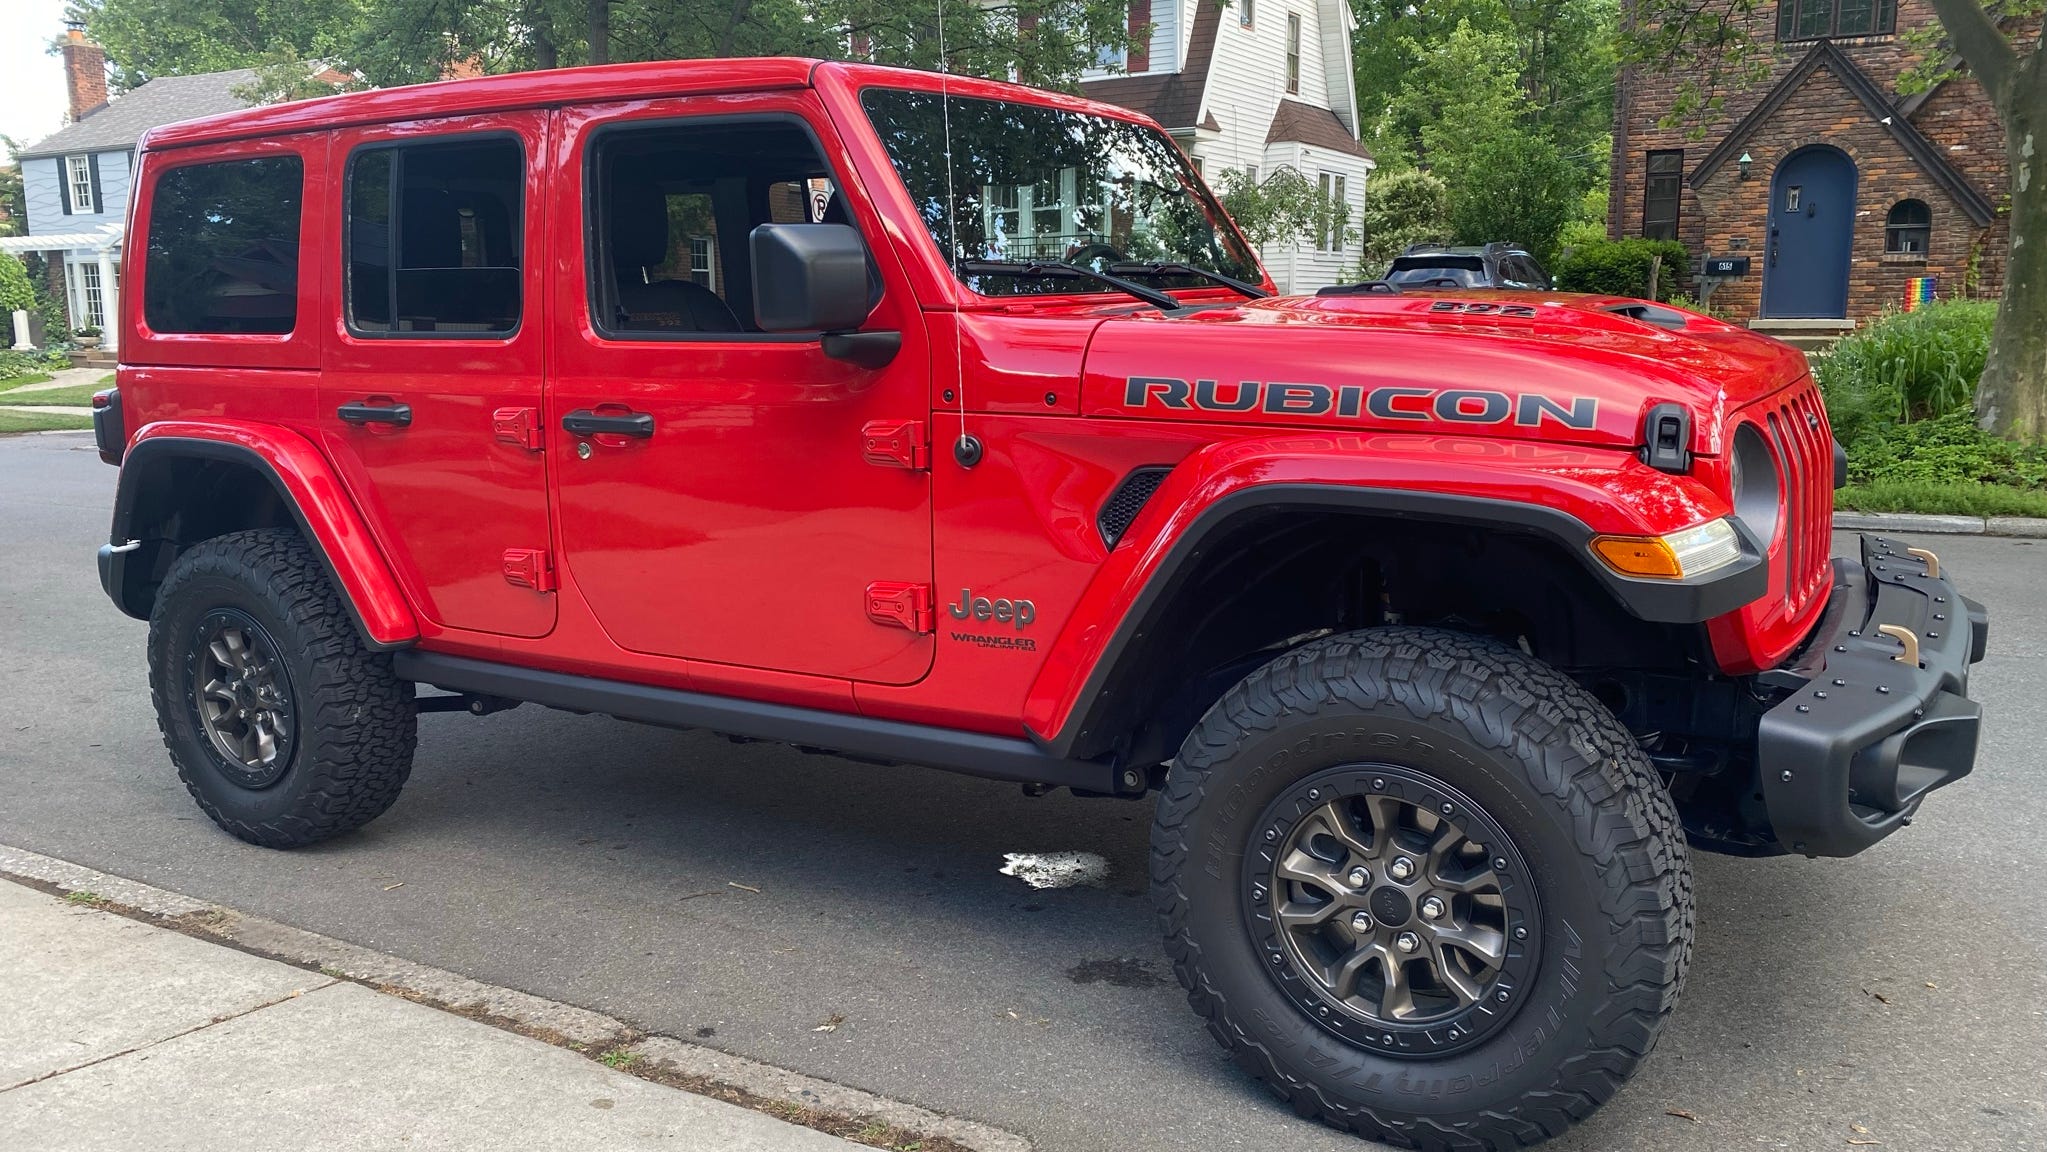 Who needs a hot rod Jeep Wrangler? You'd be surprised.